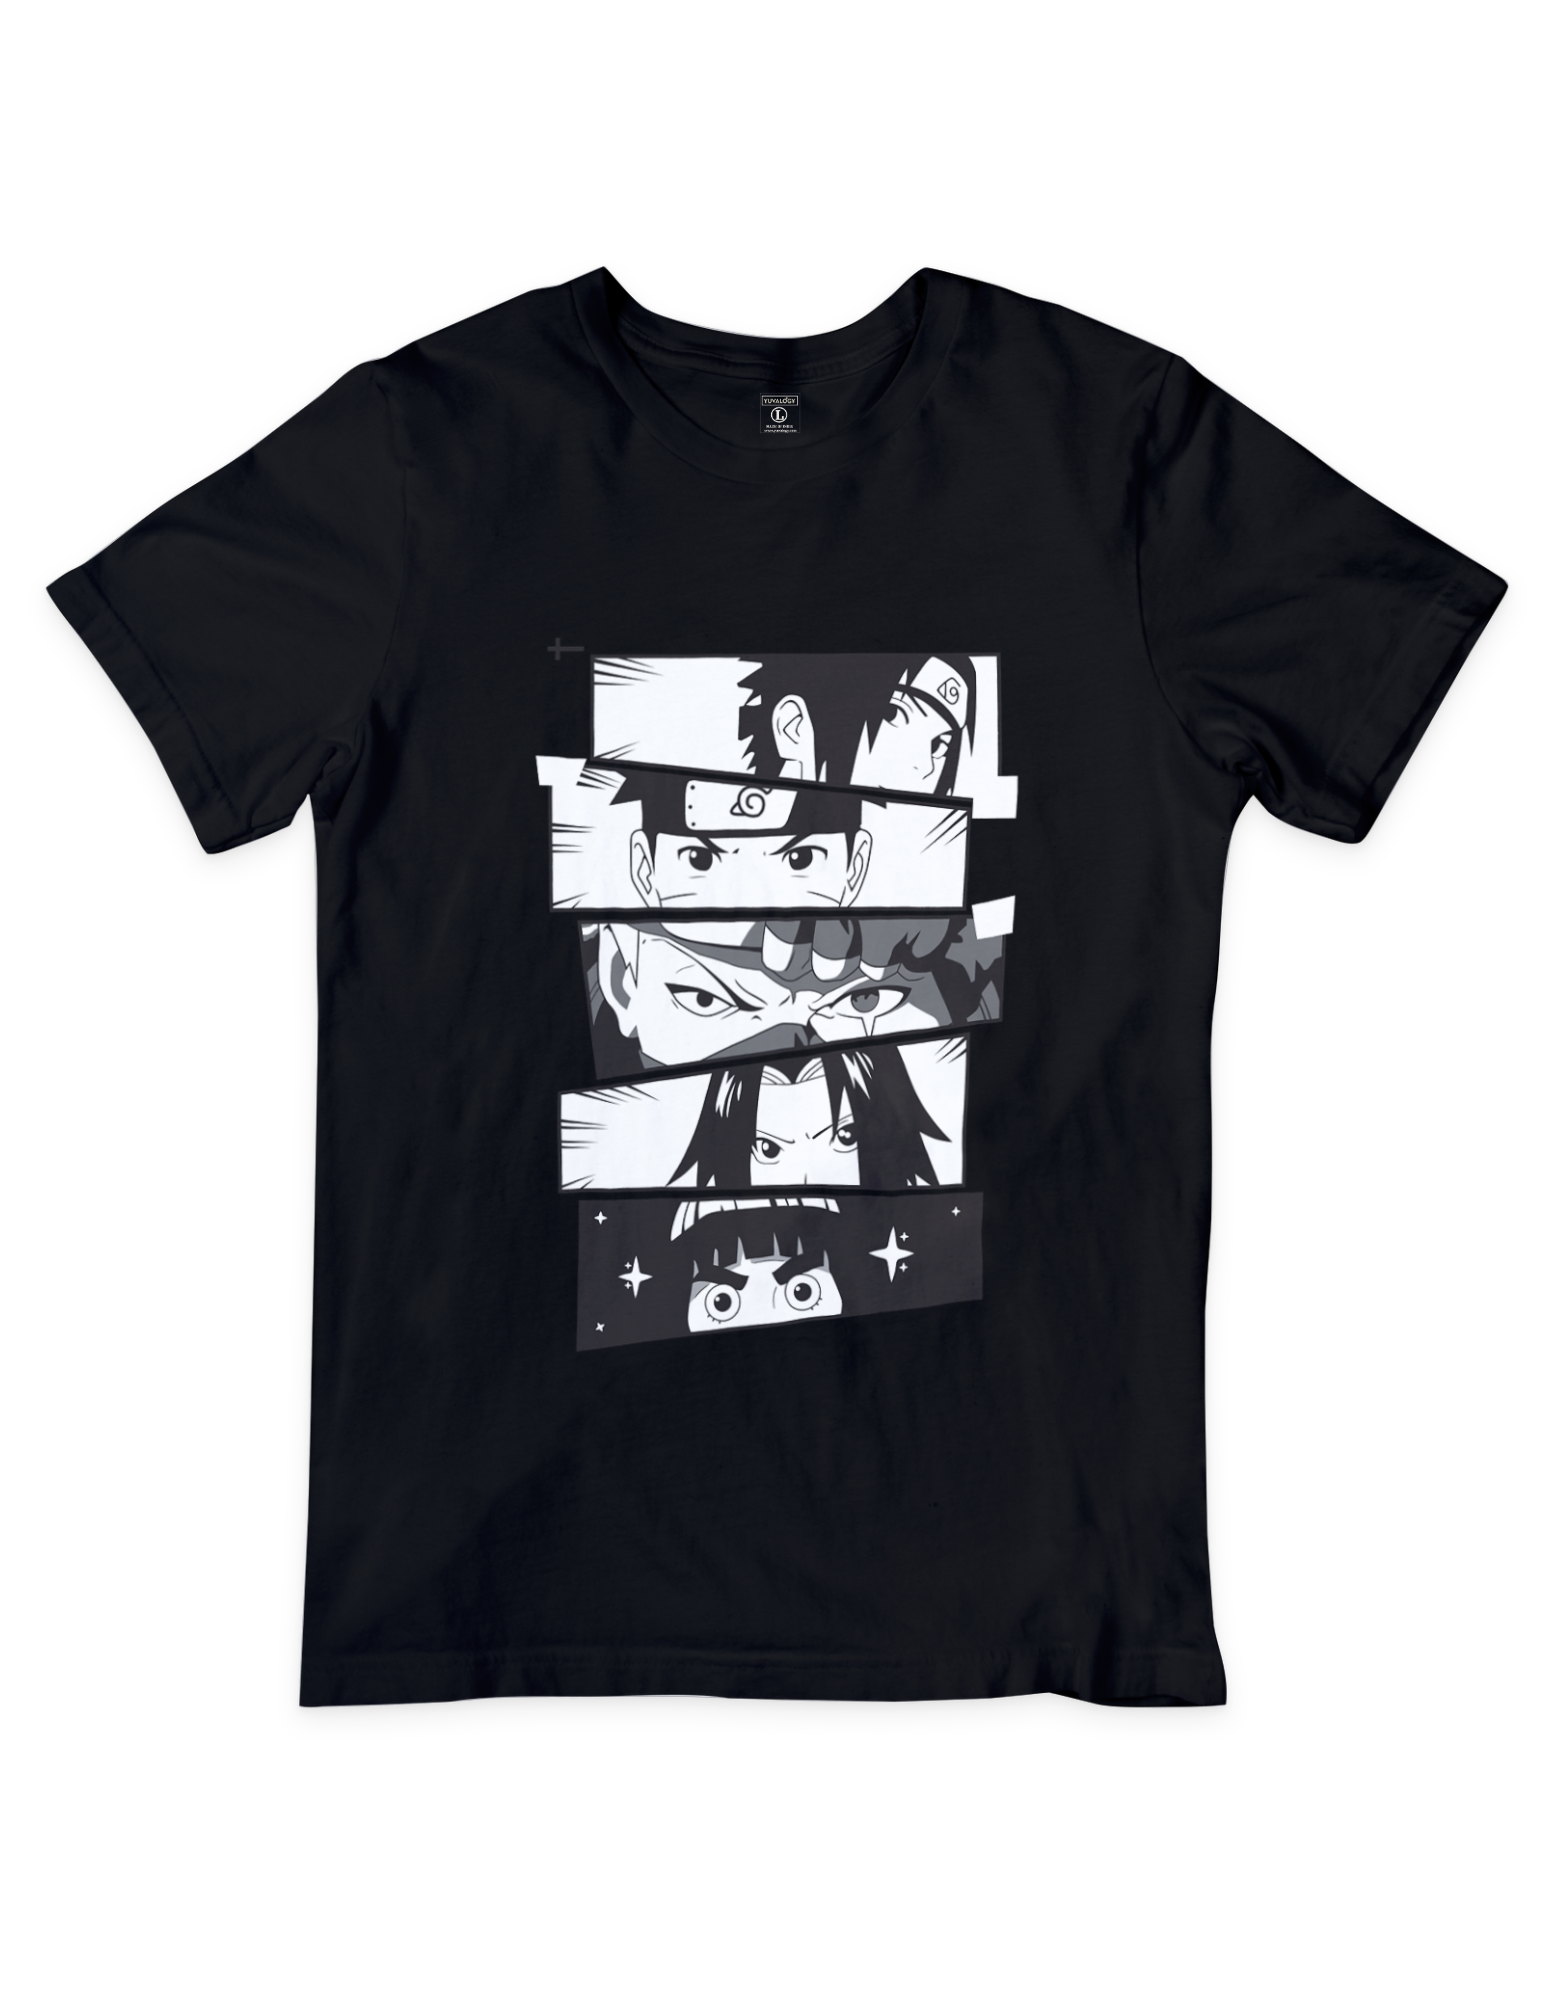 Naruto eyes design t-shirt - vibrant artwork featuring iconic Naruto characters in a striking black color palette